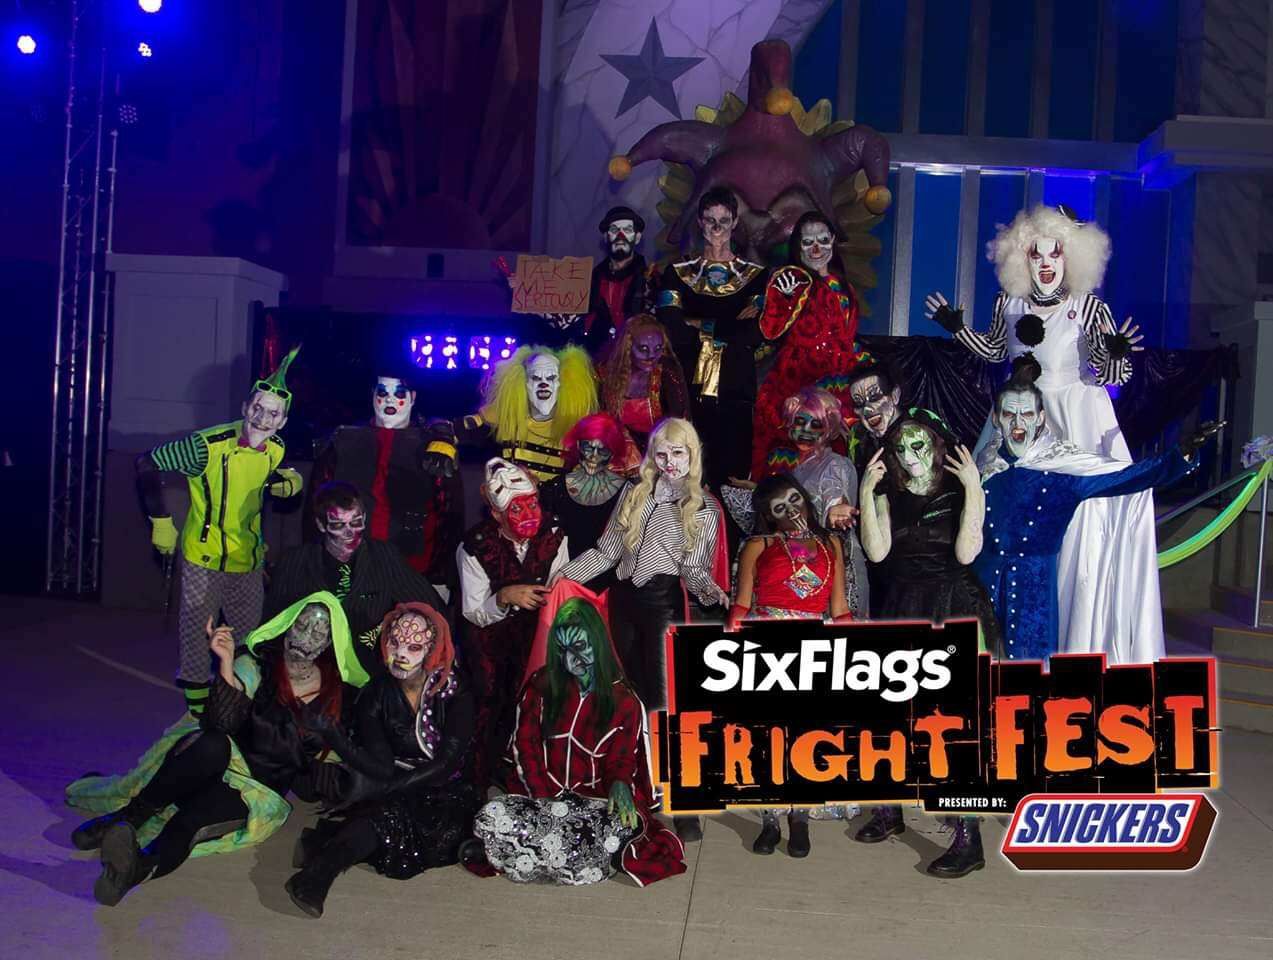 🎢🎃👻💀SIX FLAGS FRIGHT FEST TICKETS (4) WITH MAZE PASSES 🤡👽🧟‍♀️🧟‍♂️🎟🎟🎟🎟 $55 EACH FIRM